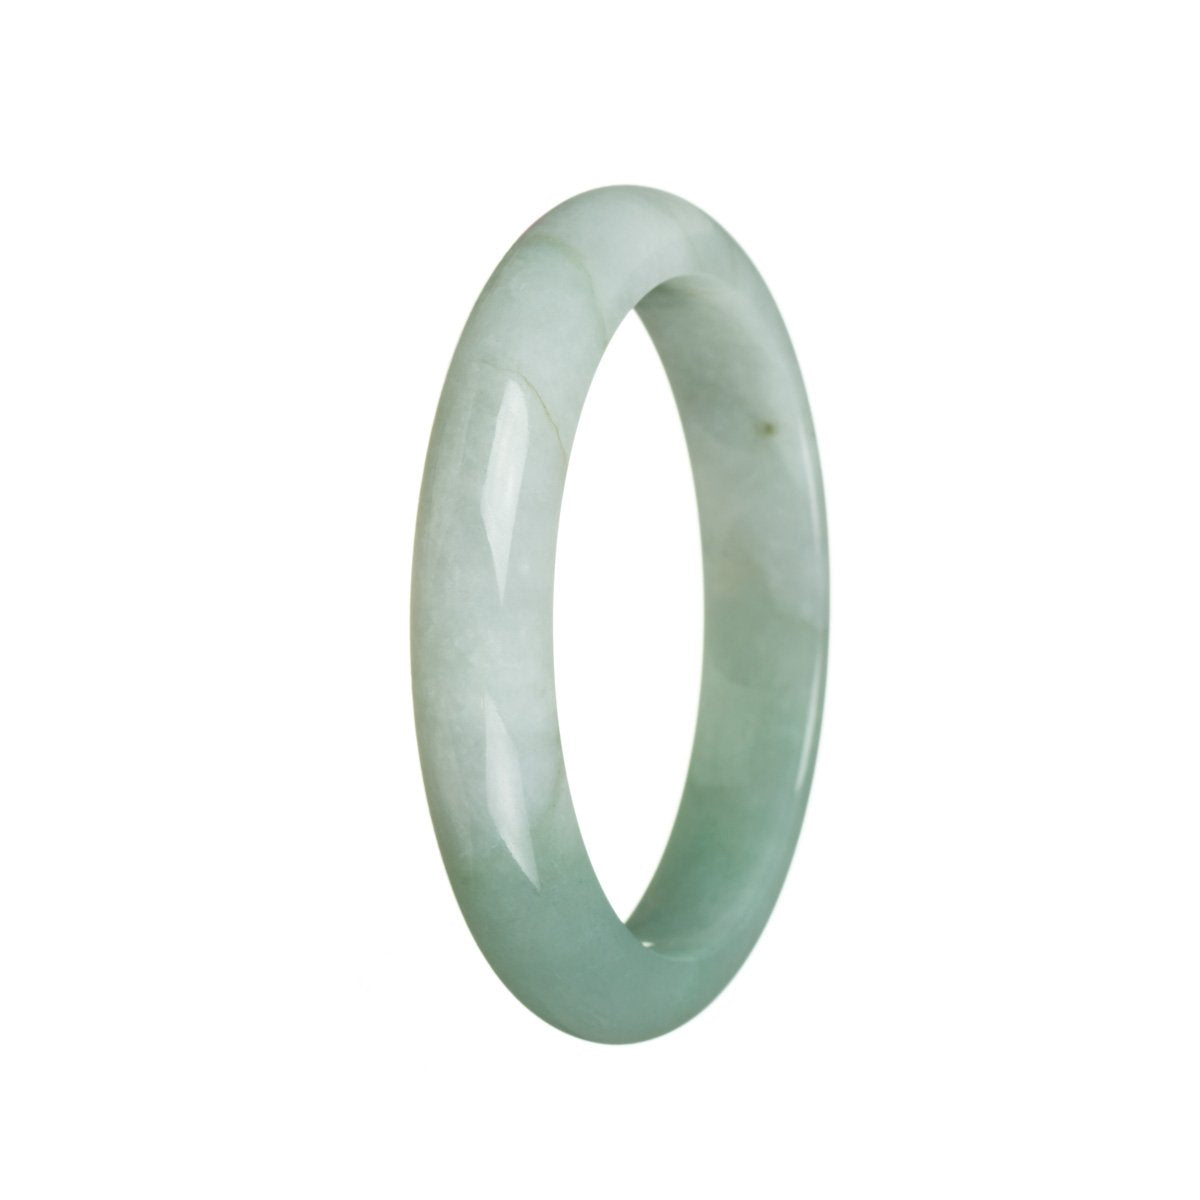 An exquisite green Burma Jade bracelet with a semi-round shape, measuring 55mm. This genuine, untreated piece from MAYS is sure to add a touch of elegance to any outfit.